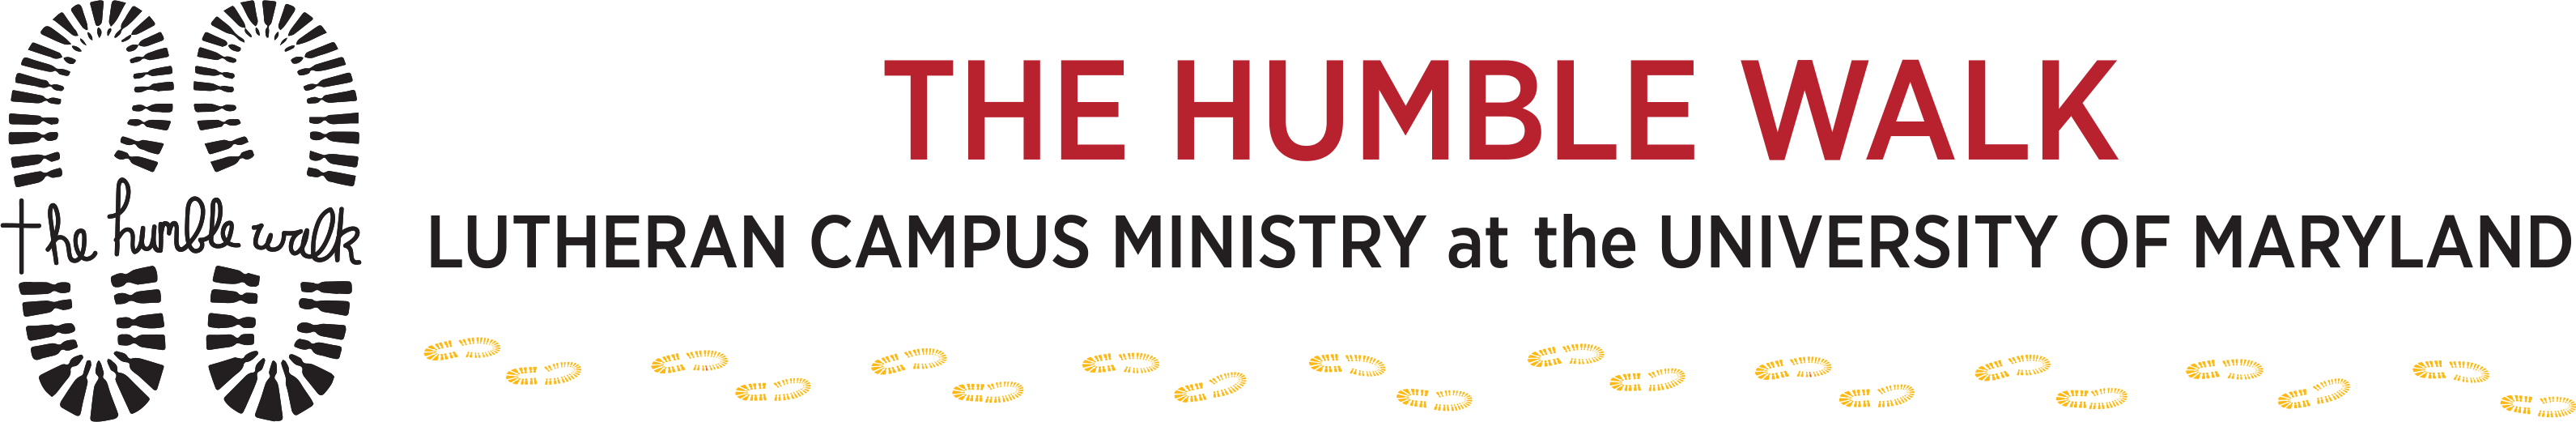 Lutheran Campus Ministry • The Humble Walk -- Multi-Media Header Graphic